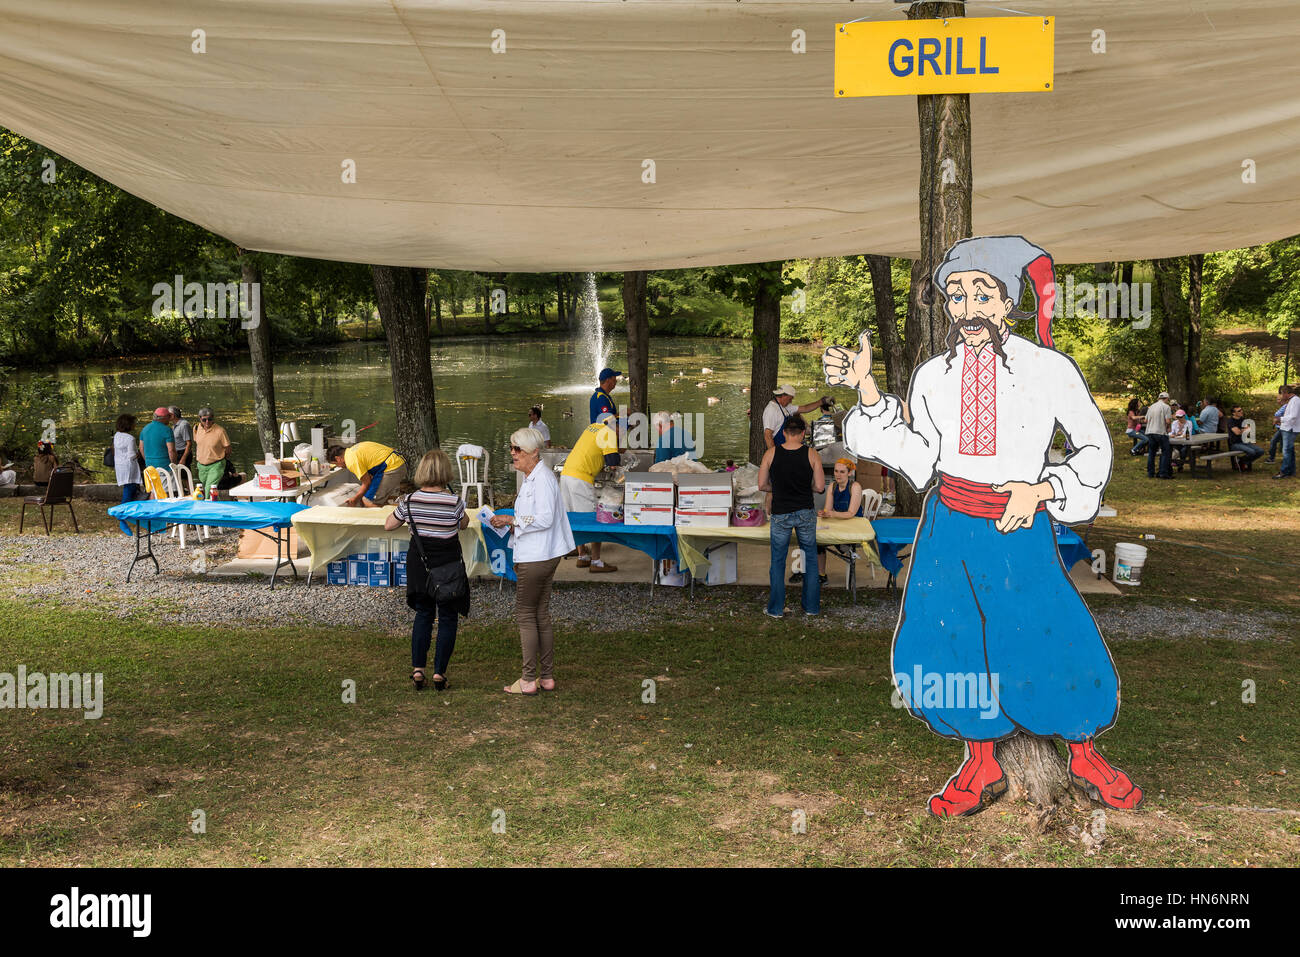 Silver Spring, USA - September 17, 2016: Cut out of Cossack man with grill sign and picnic area at Ukrainian festival Stock Photo